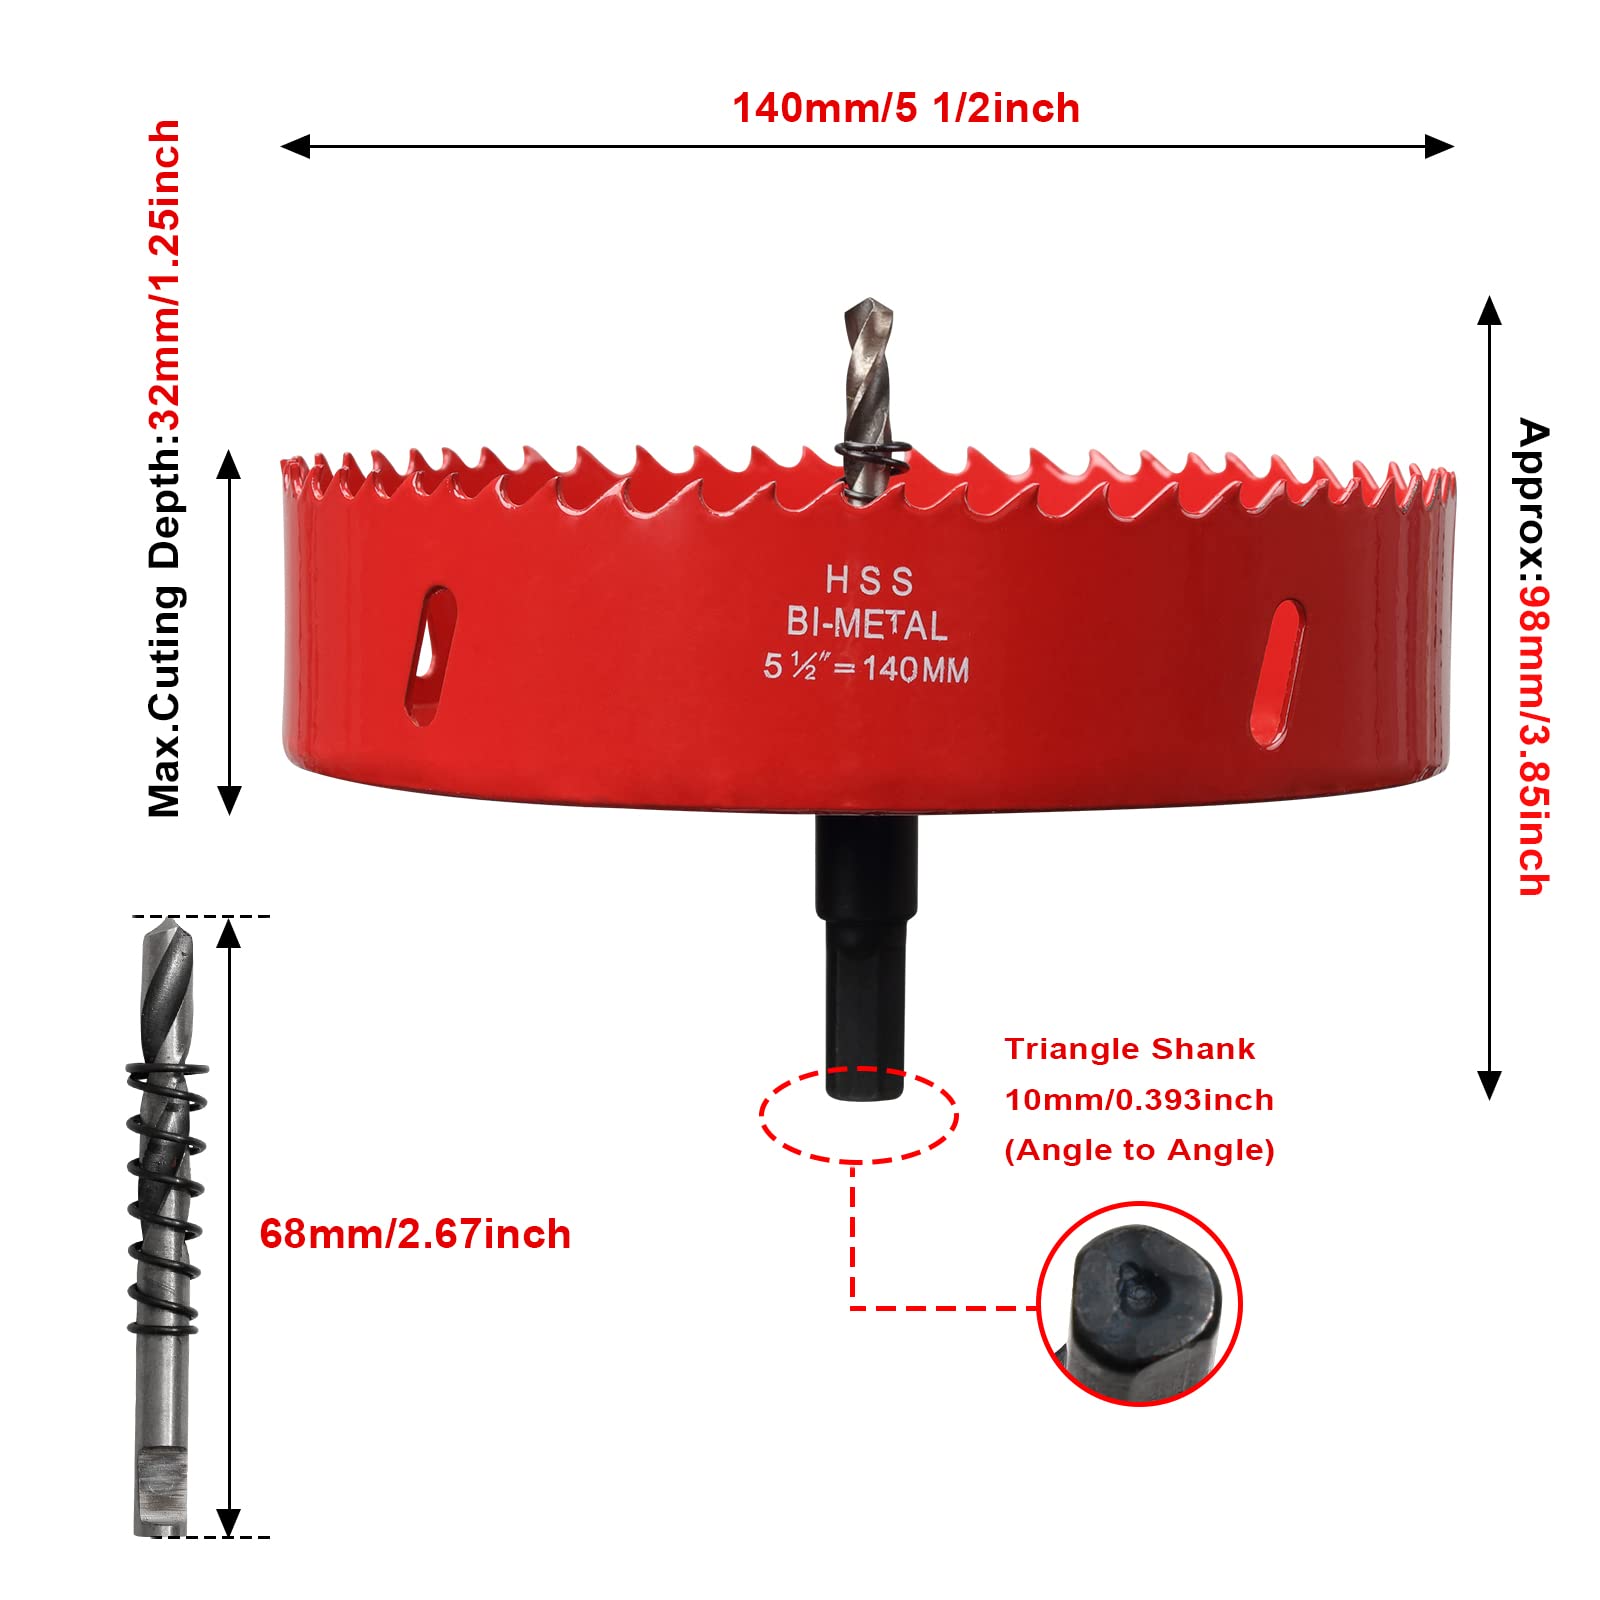 Hole Saw 5 1/2” (140mm) for Wood, HSS Bi-Metal Hole Cutter with Pilot Drill Bit for Plywood, Cornhole, Ceiling and Drywall